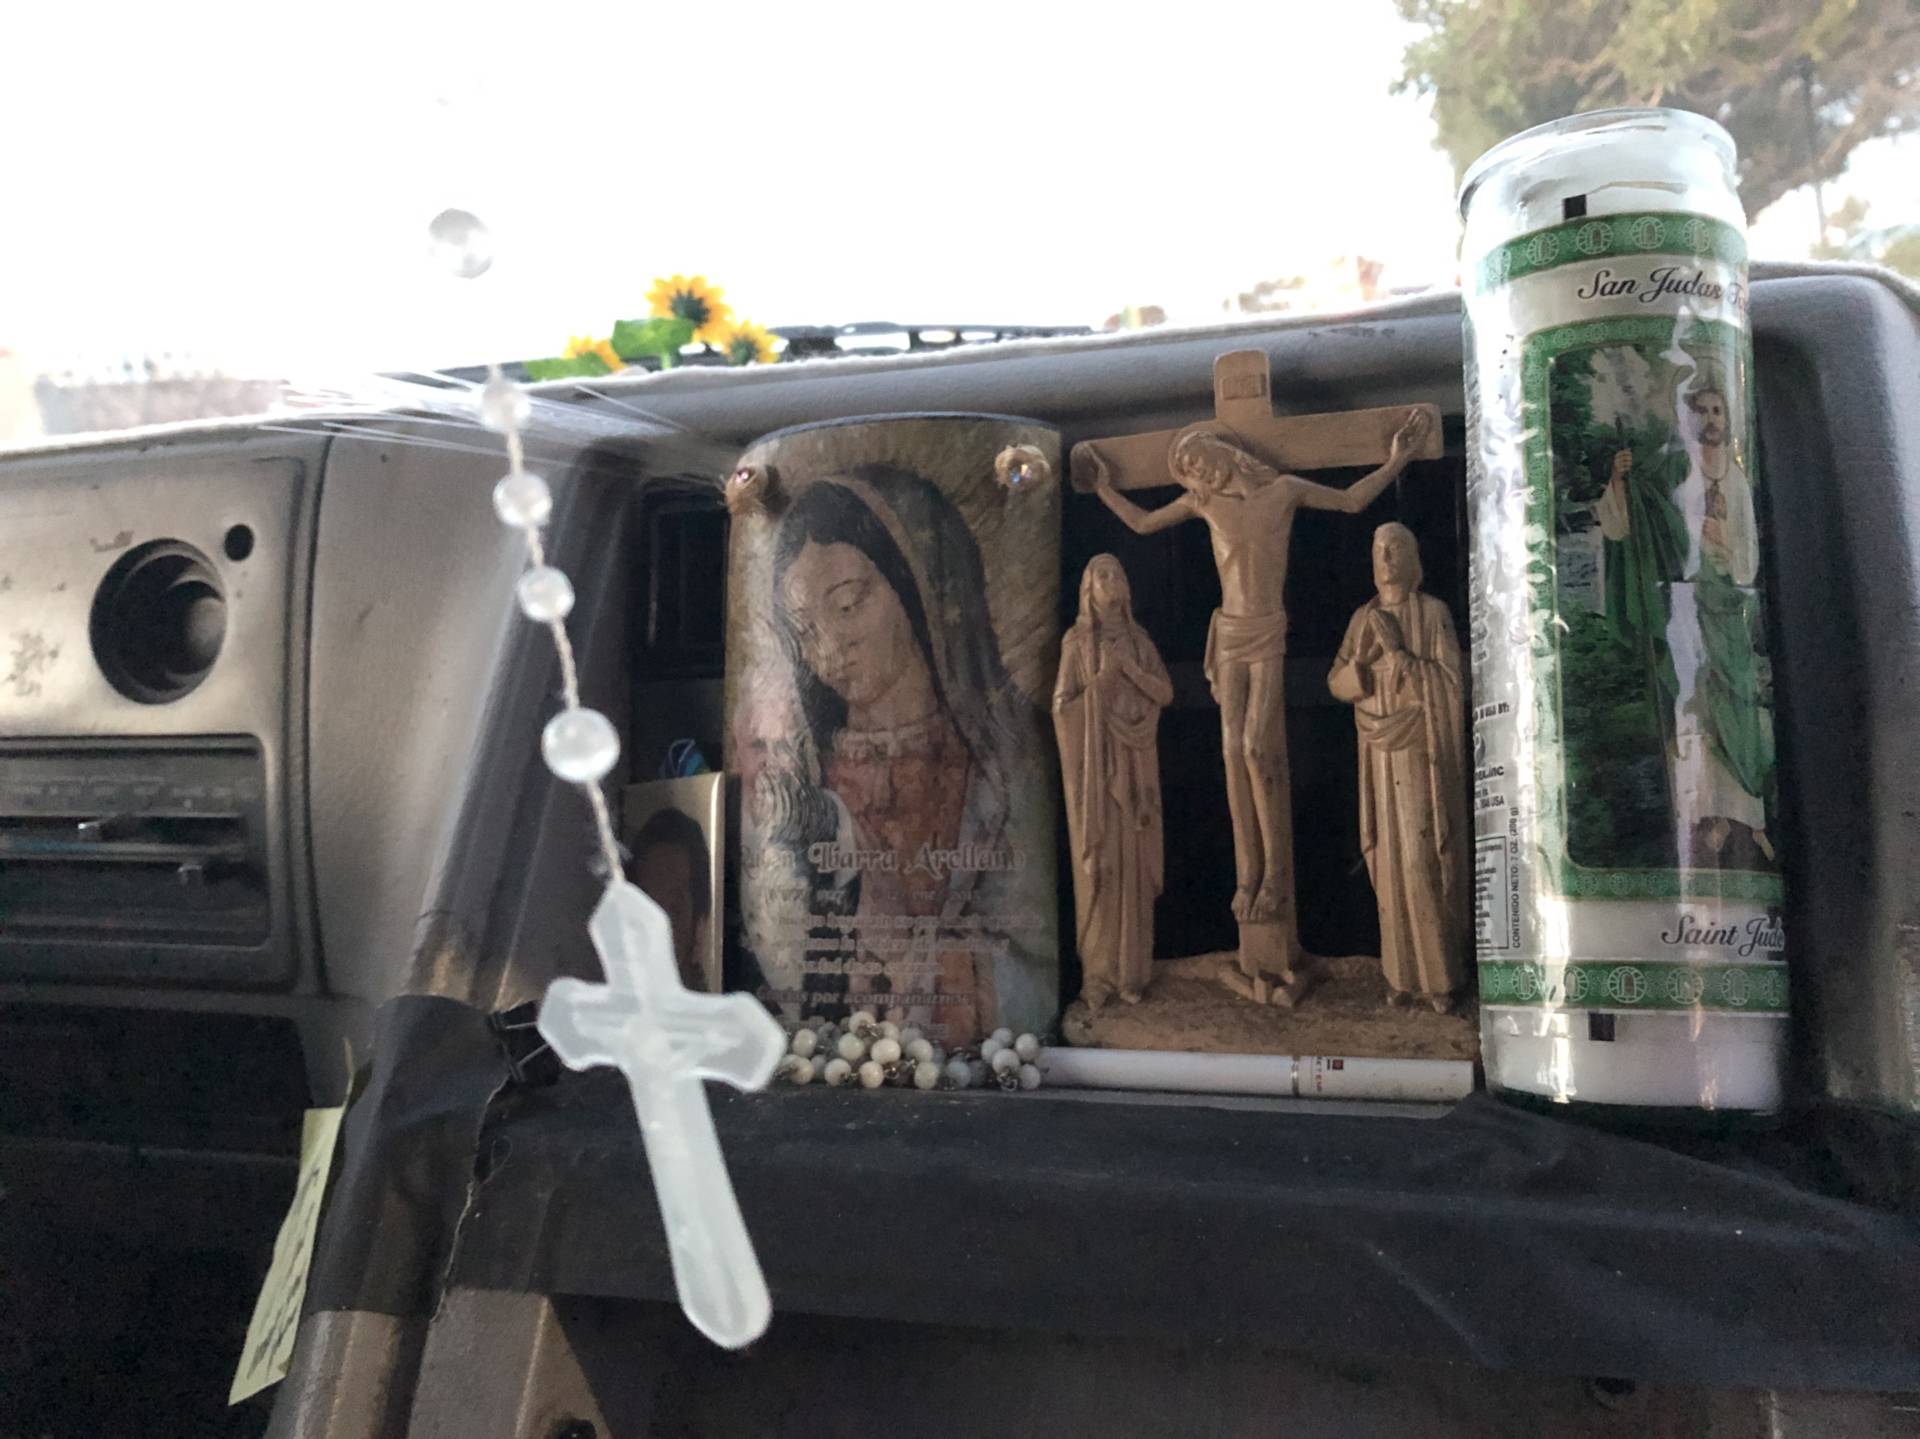 Armando Ibarra, a hotel restaurant worker in San Francisco, lives out of his van to save money — and to avoid an hours-long commute from San Jose. A holy candle rests on his dashboard; a rosary hangs from the rearview mirror.